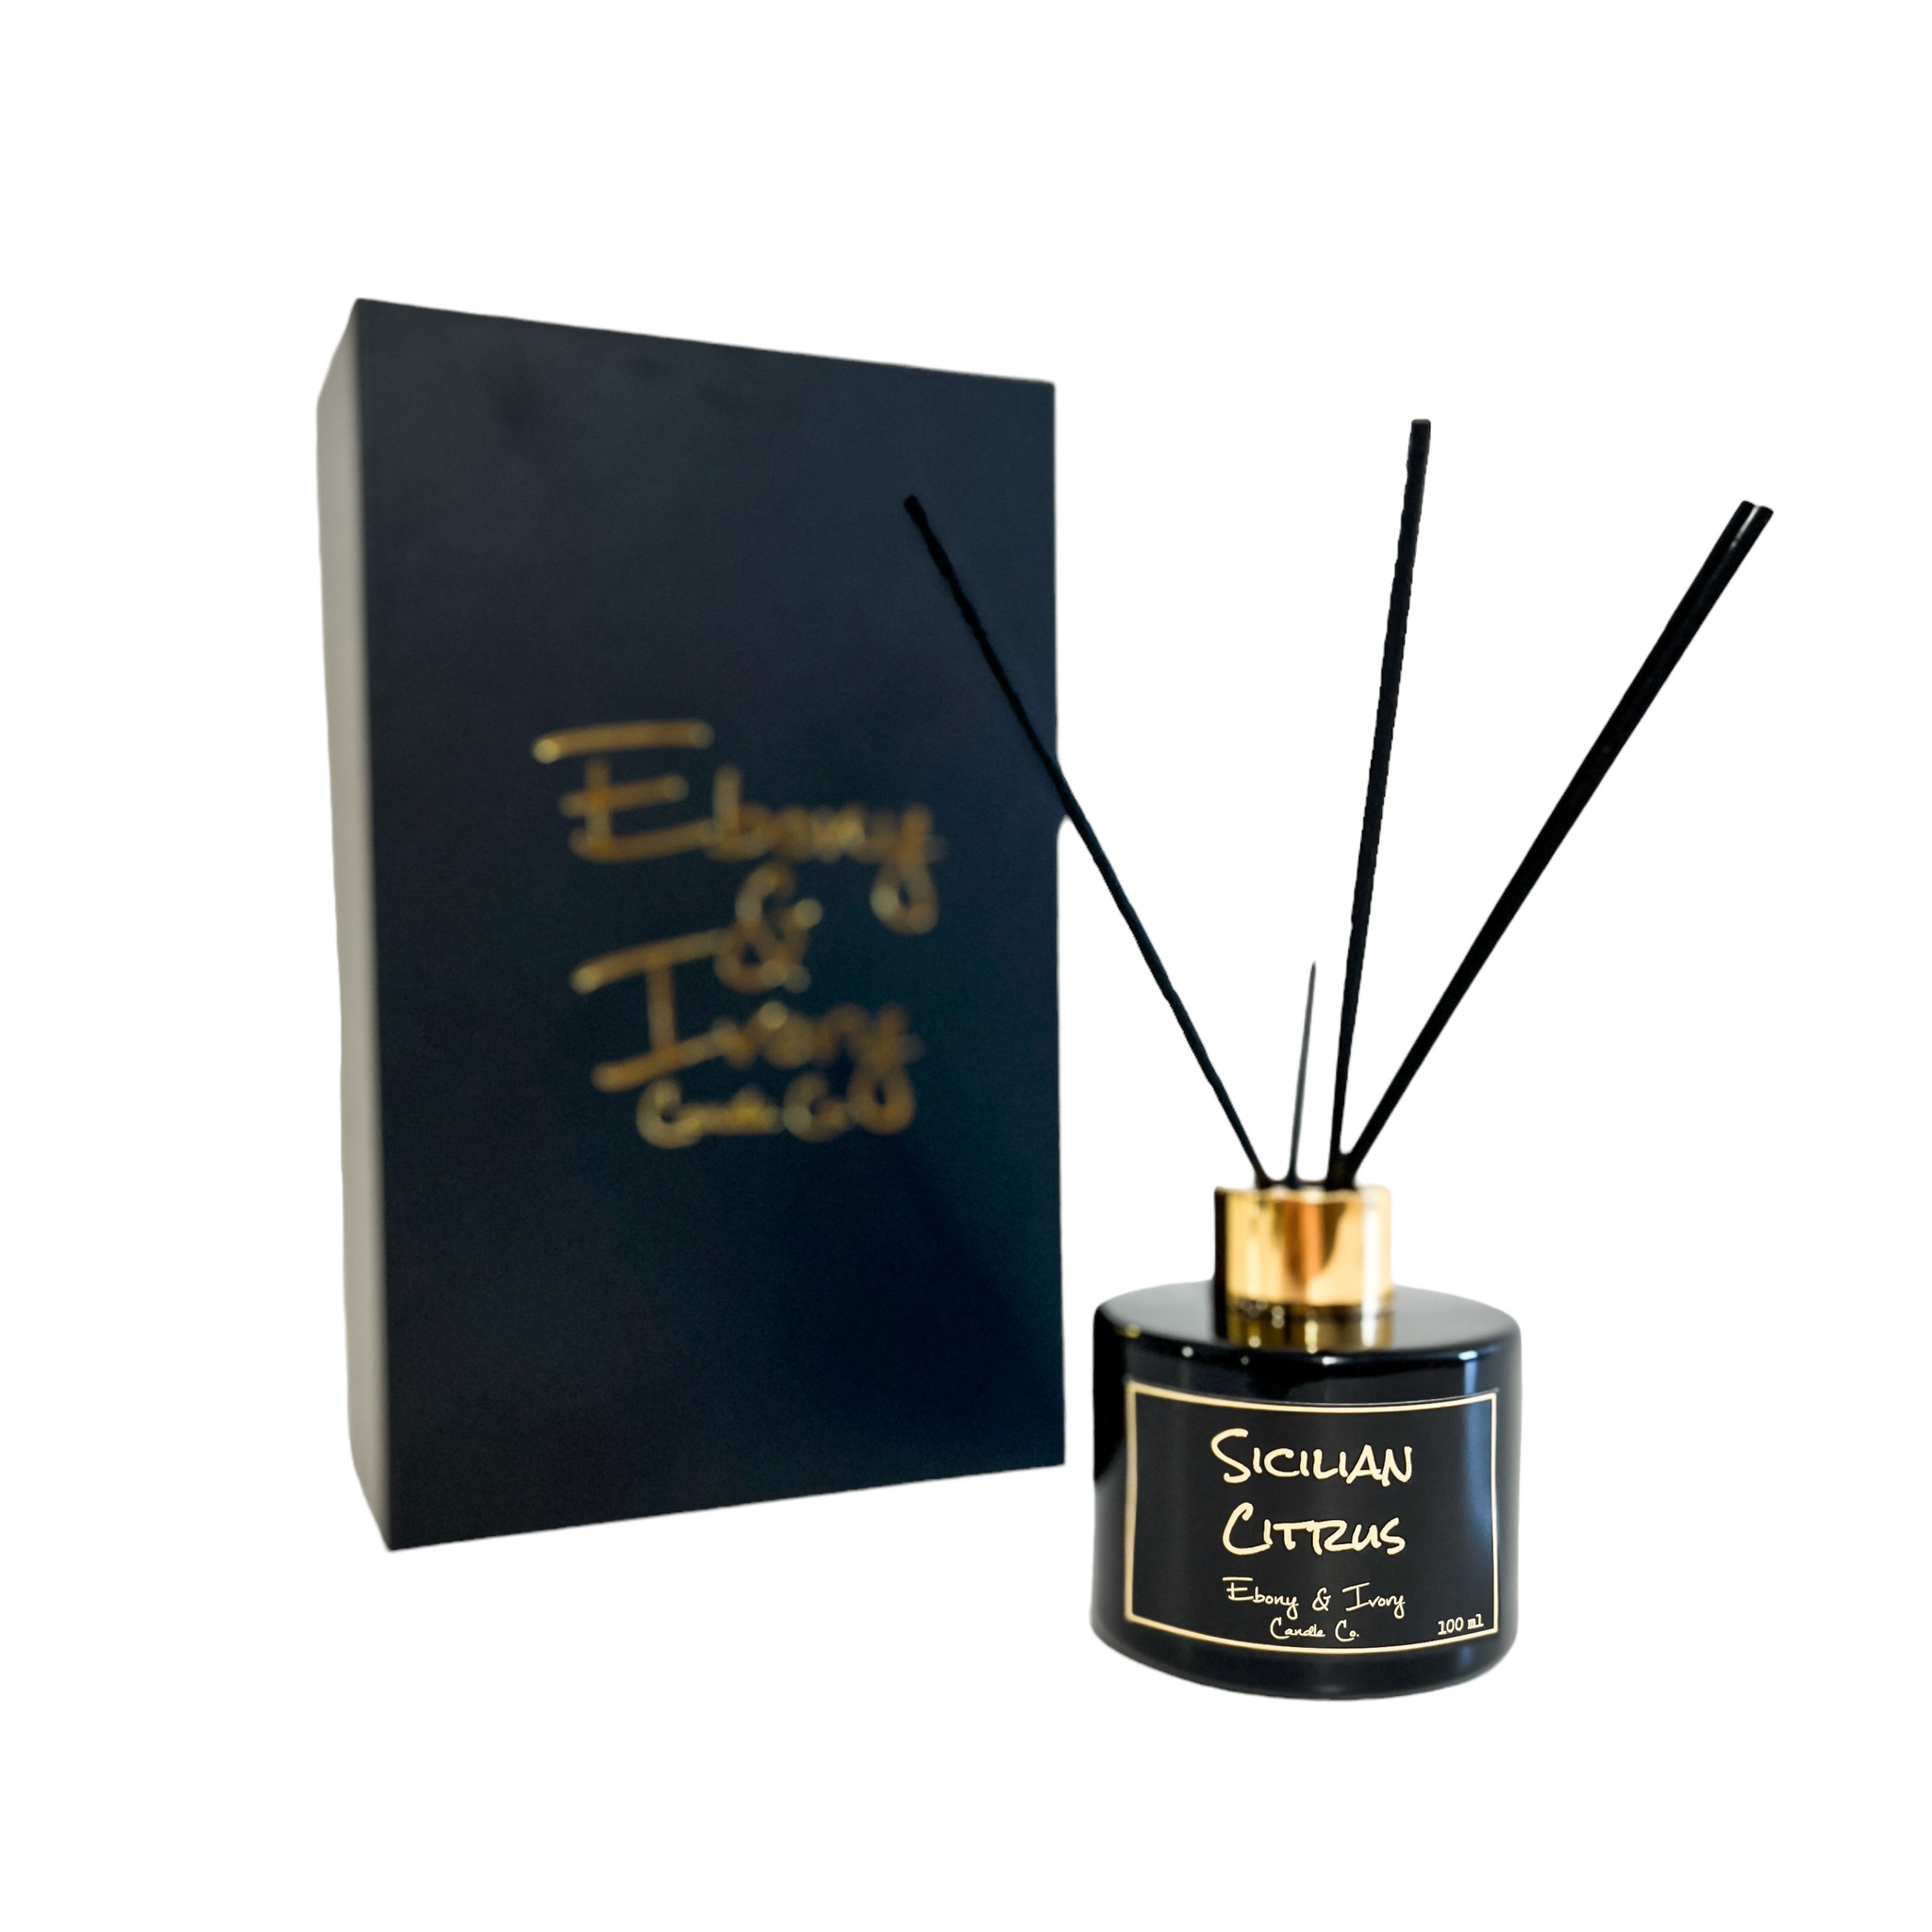 Black, one hundred milliliter, bergamot, grapefruit, and fresh greens scented reed diffuser with a gold lid and a black label that reads Sicilian Citrus